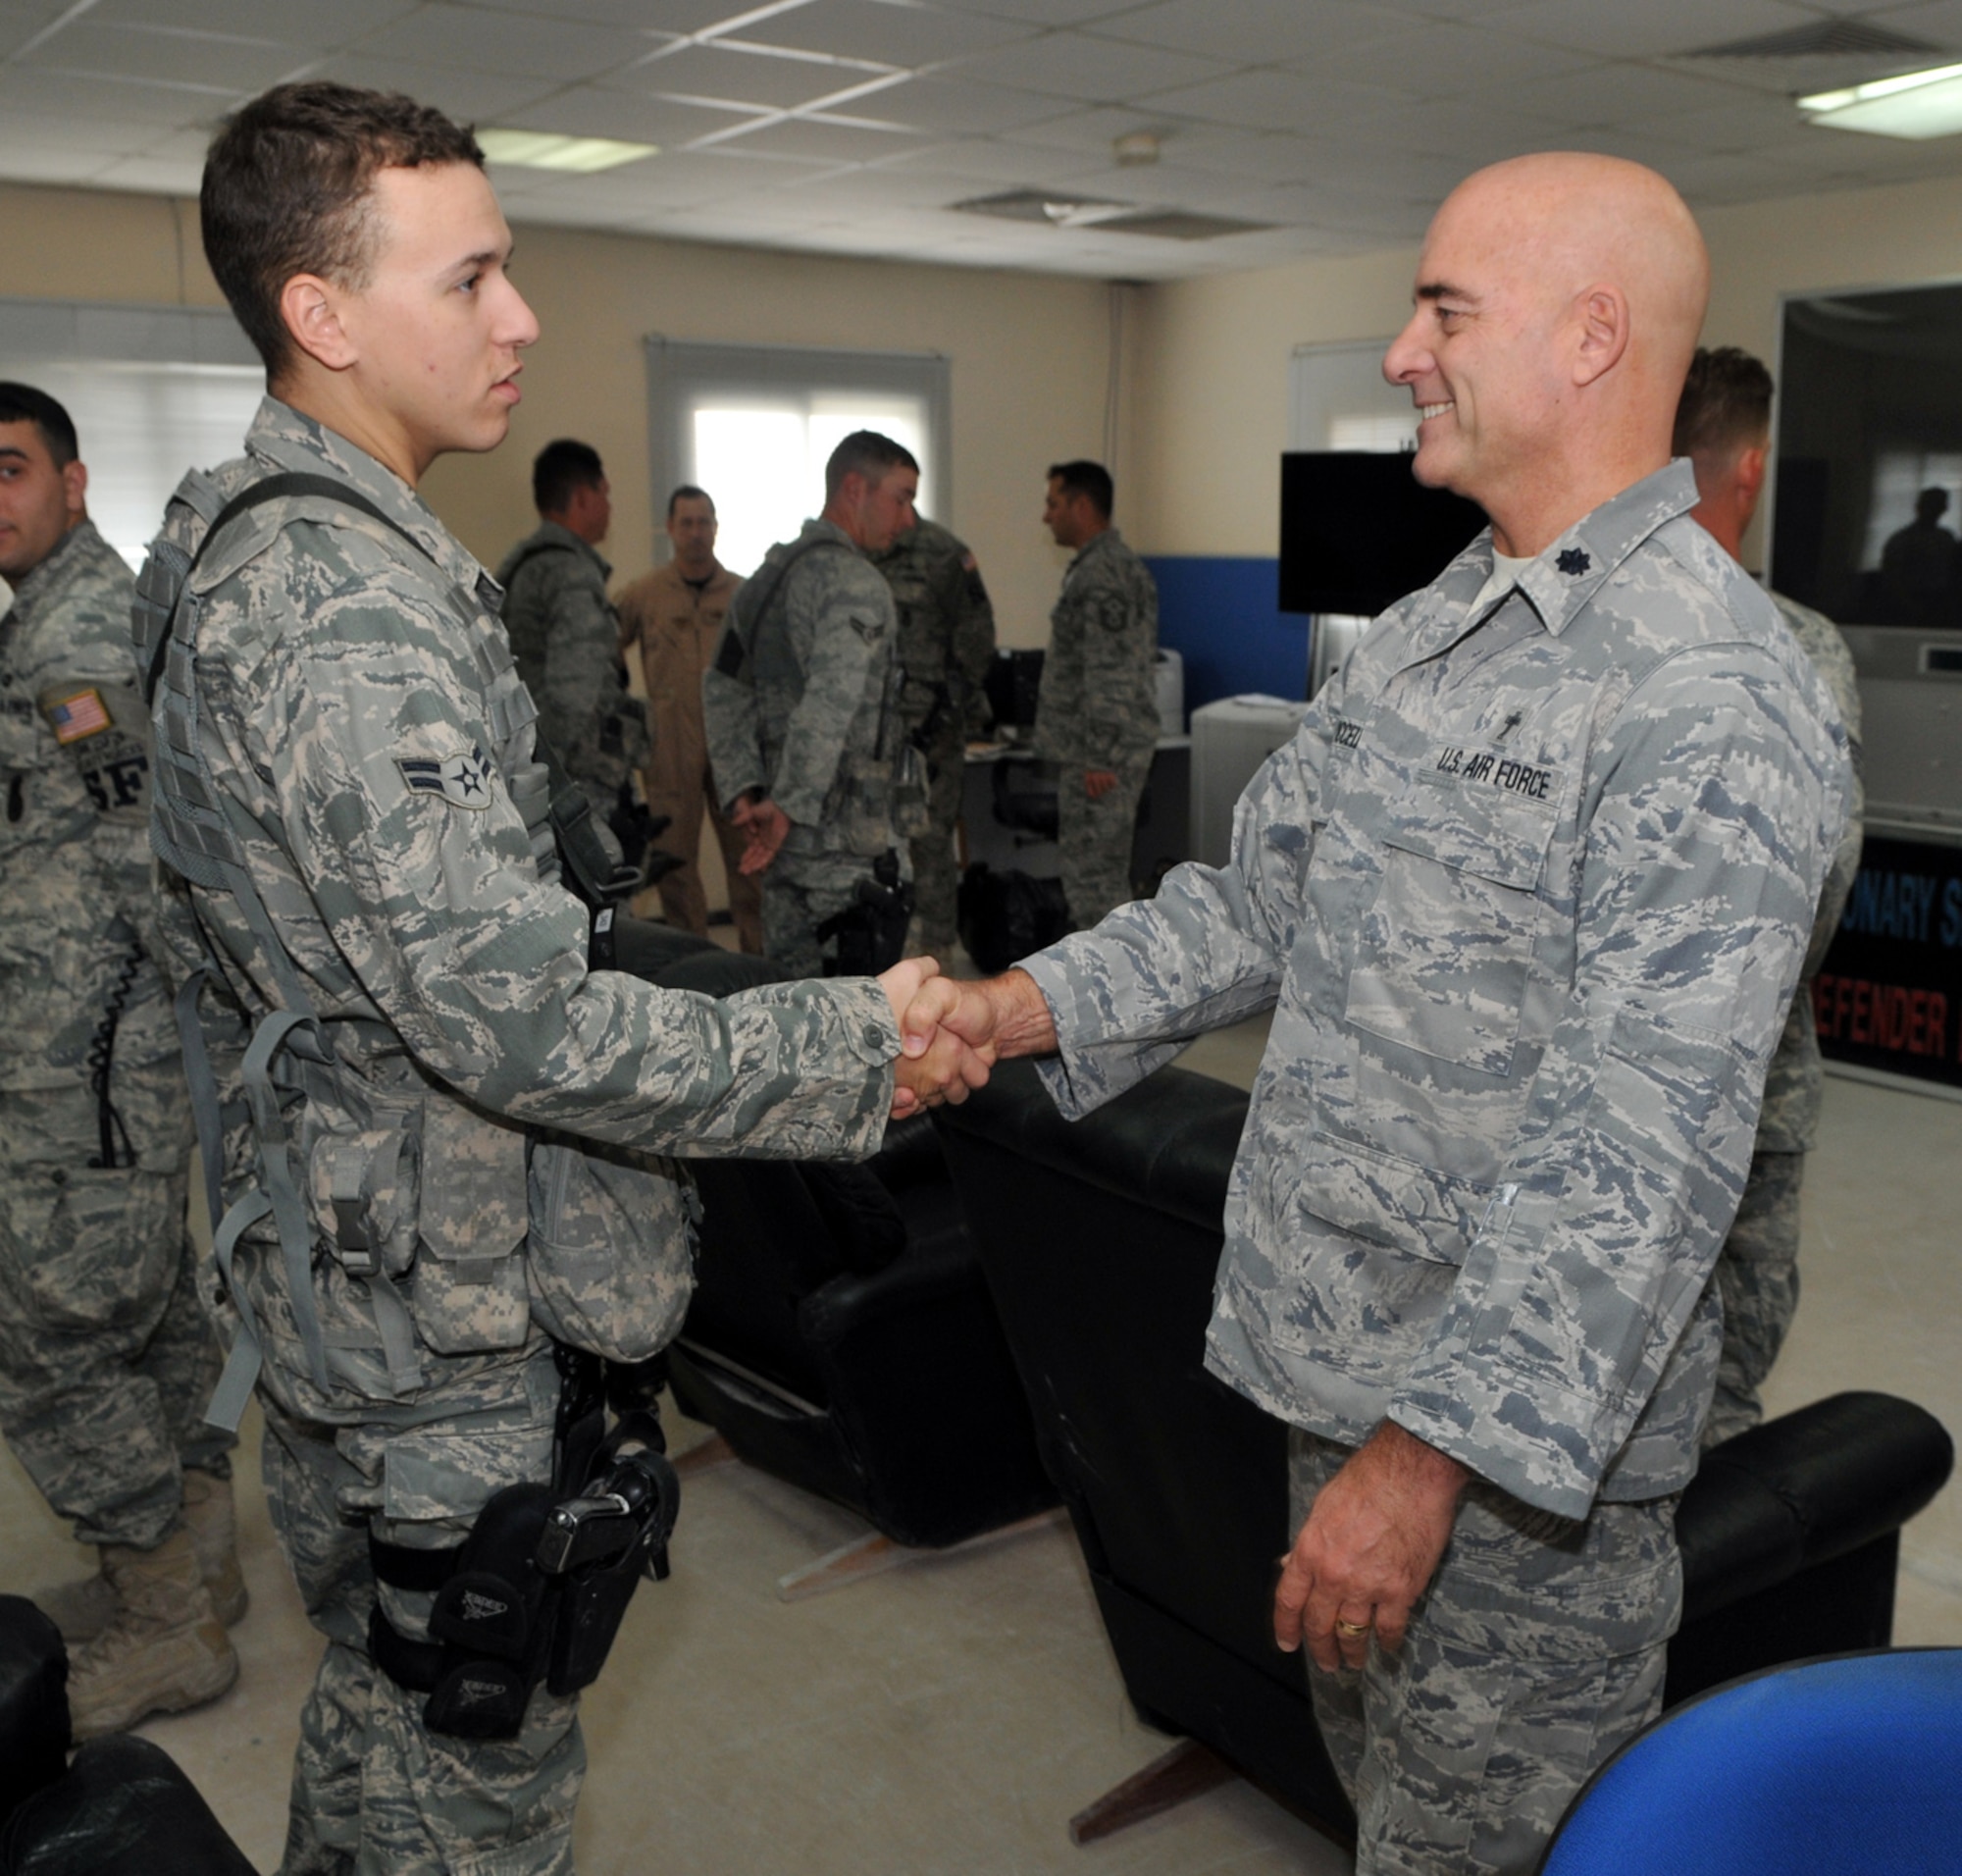 SOUTHWEST ASIA -- Chaplain (Lt. Col.) Frederick Viccellio, 100th Air Refueling Wing chaplain, greets members of the 379th Expeditionary Security Forces Squadron deployed from RAF Mildenhall during a visit Dec. 18.  Chaplain Viccellio travelled with Col. Chad Manske, 100th ARW commander, to the Middle East to hand deliver treats and encouragement during the holidays. (U.S. Air Force photo by Staff Sgt. Austin M. May)